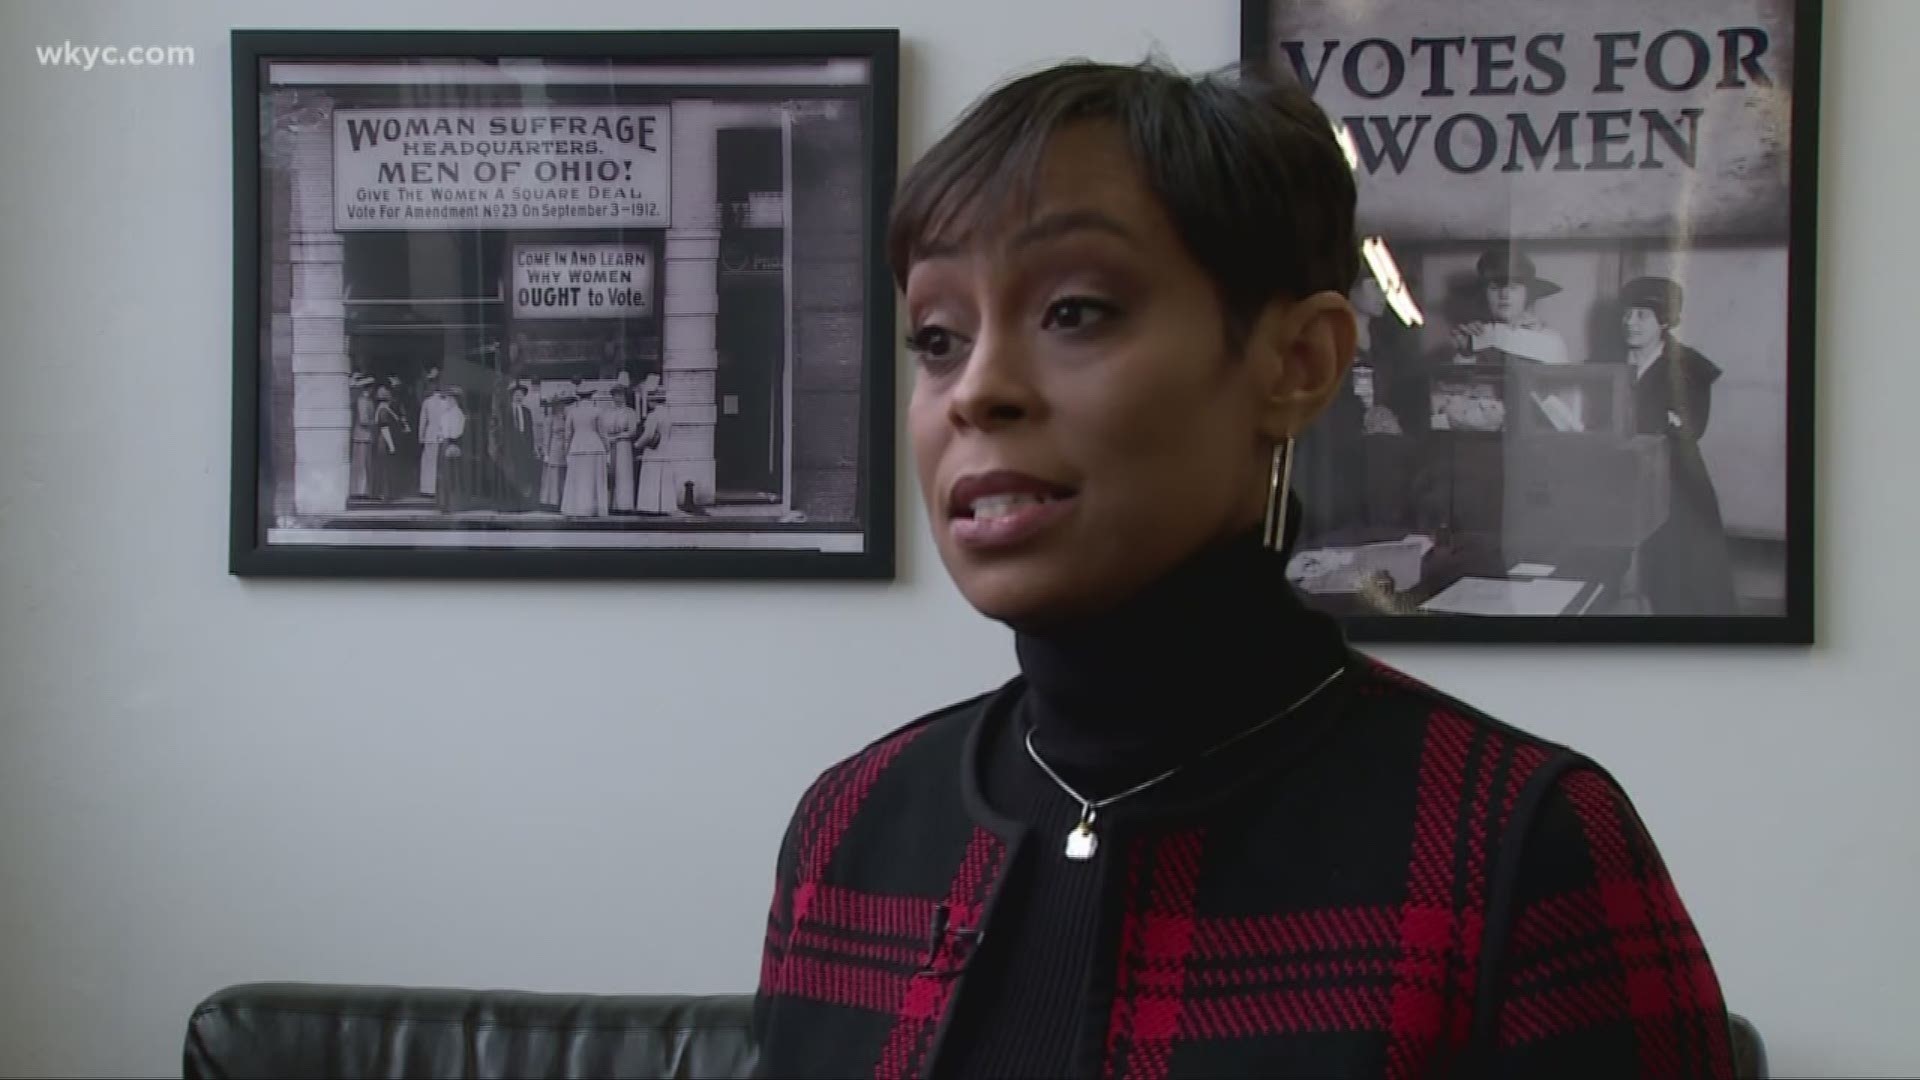 Leon Bibb recently sat down with Shontel Brown, the first African American and the first woman to lead Cuyahoga County's Democratic Party.